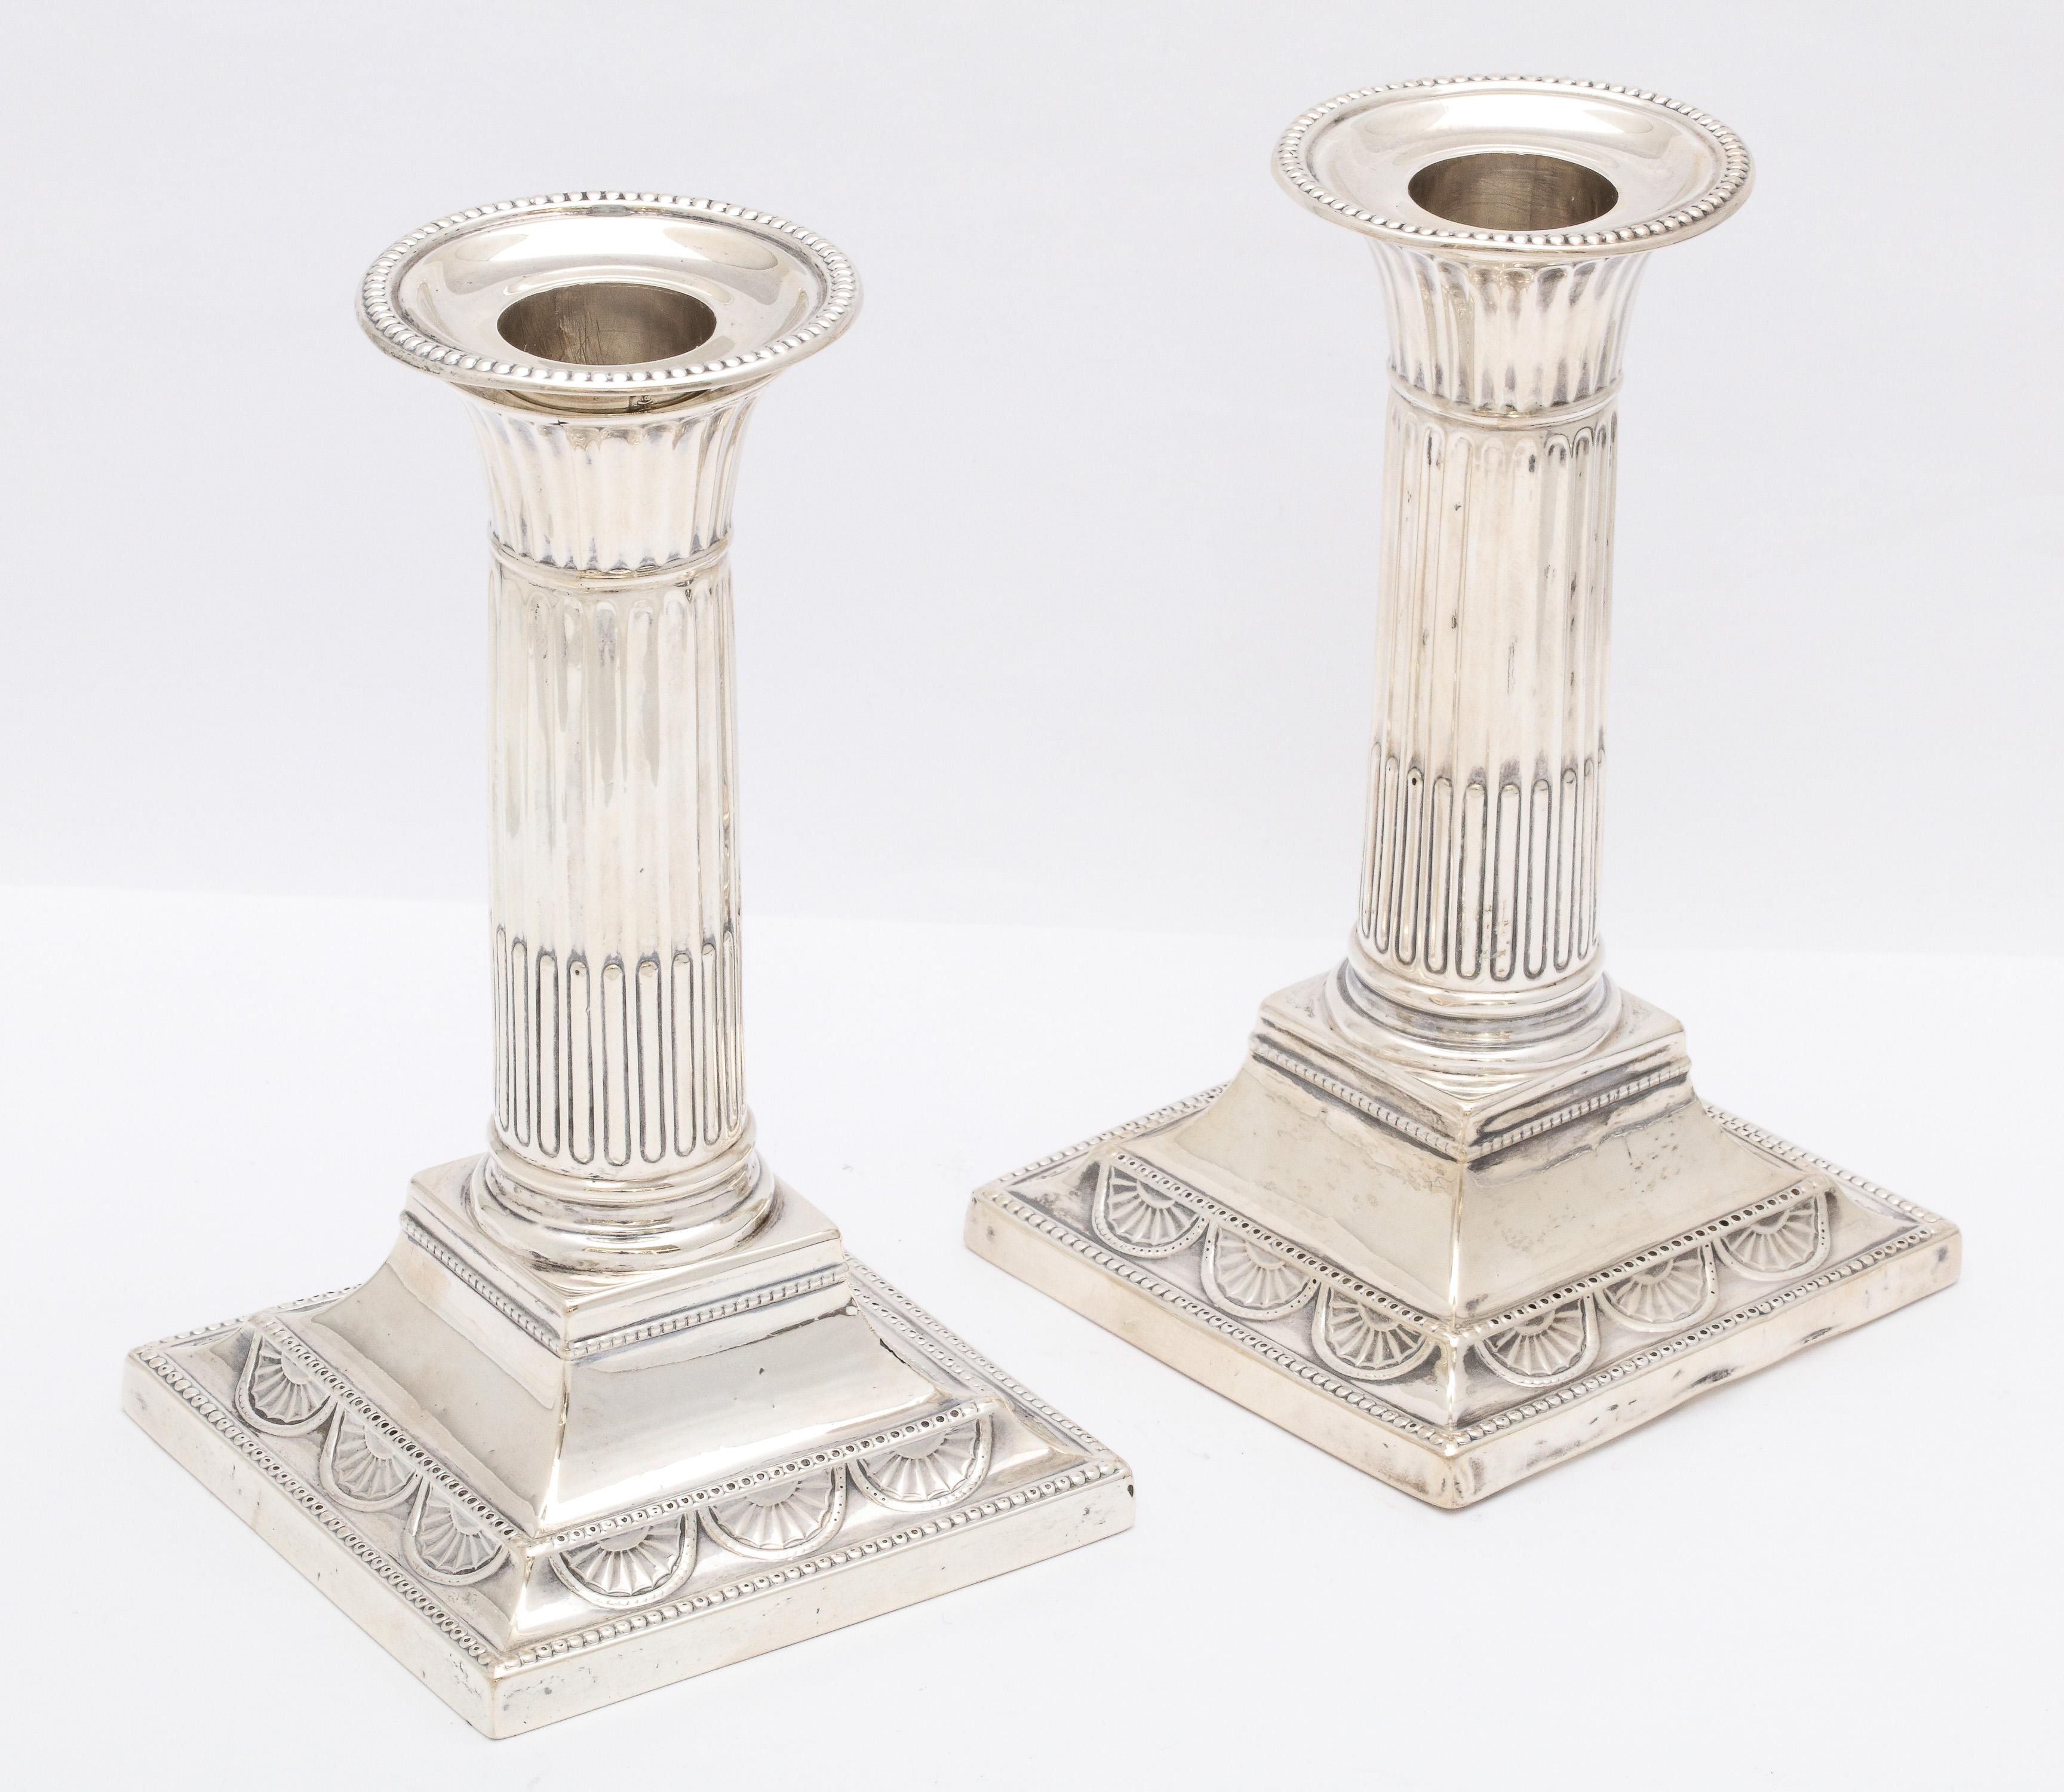 Pair of sterling silver, neoclassical, column-form candlesticks, London, year-hallmarked for 1895, William Hutton and Sons - makers. Each candlestick measures: 5 1/2 inches high x 3 1/2 inches deep (across square base) x 3 1/2 inches wide (across